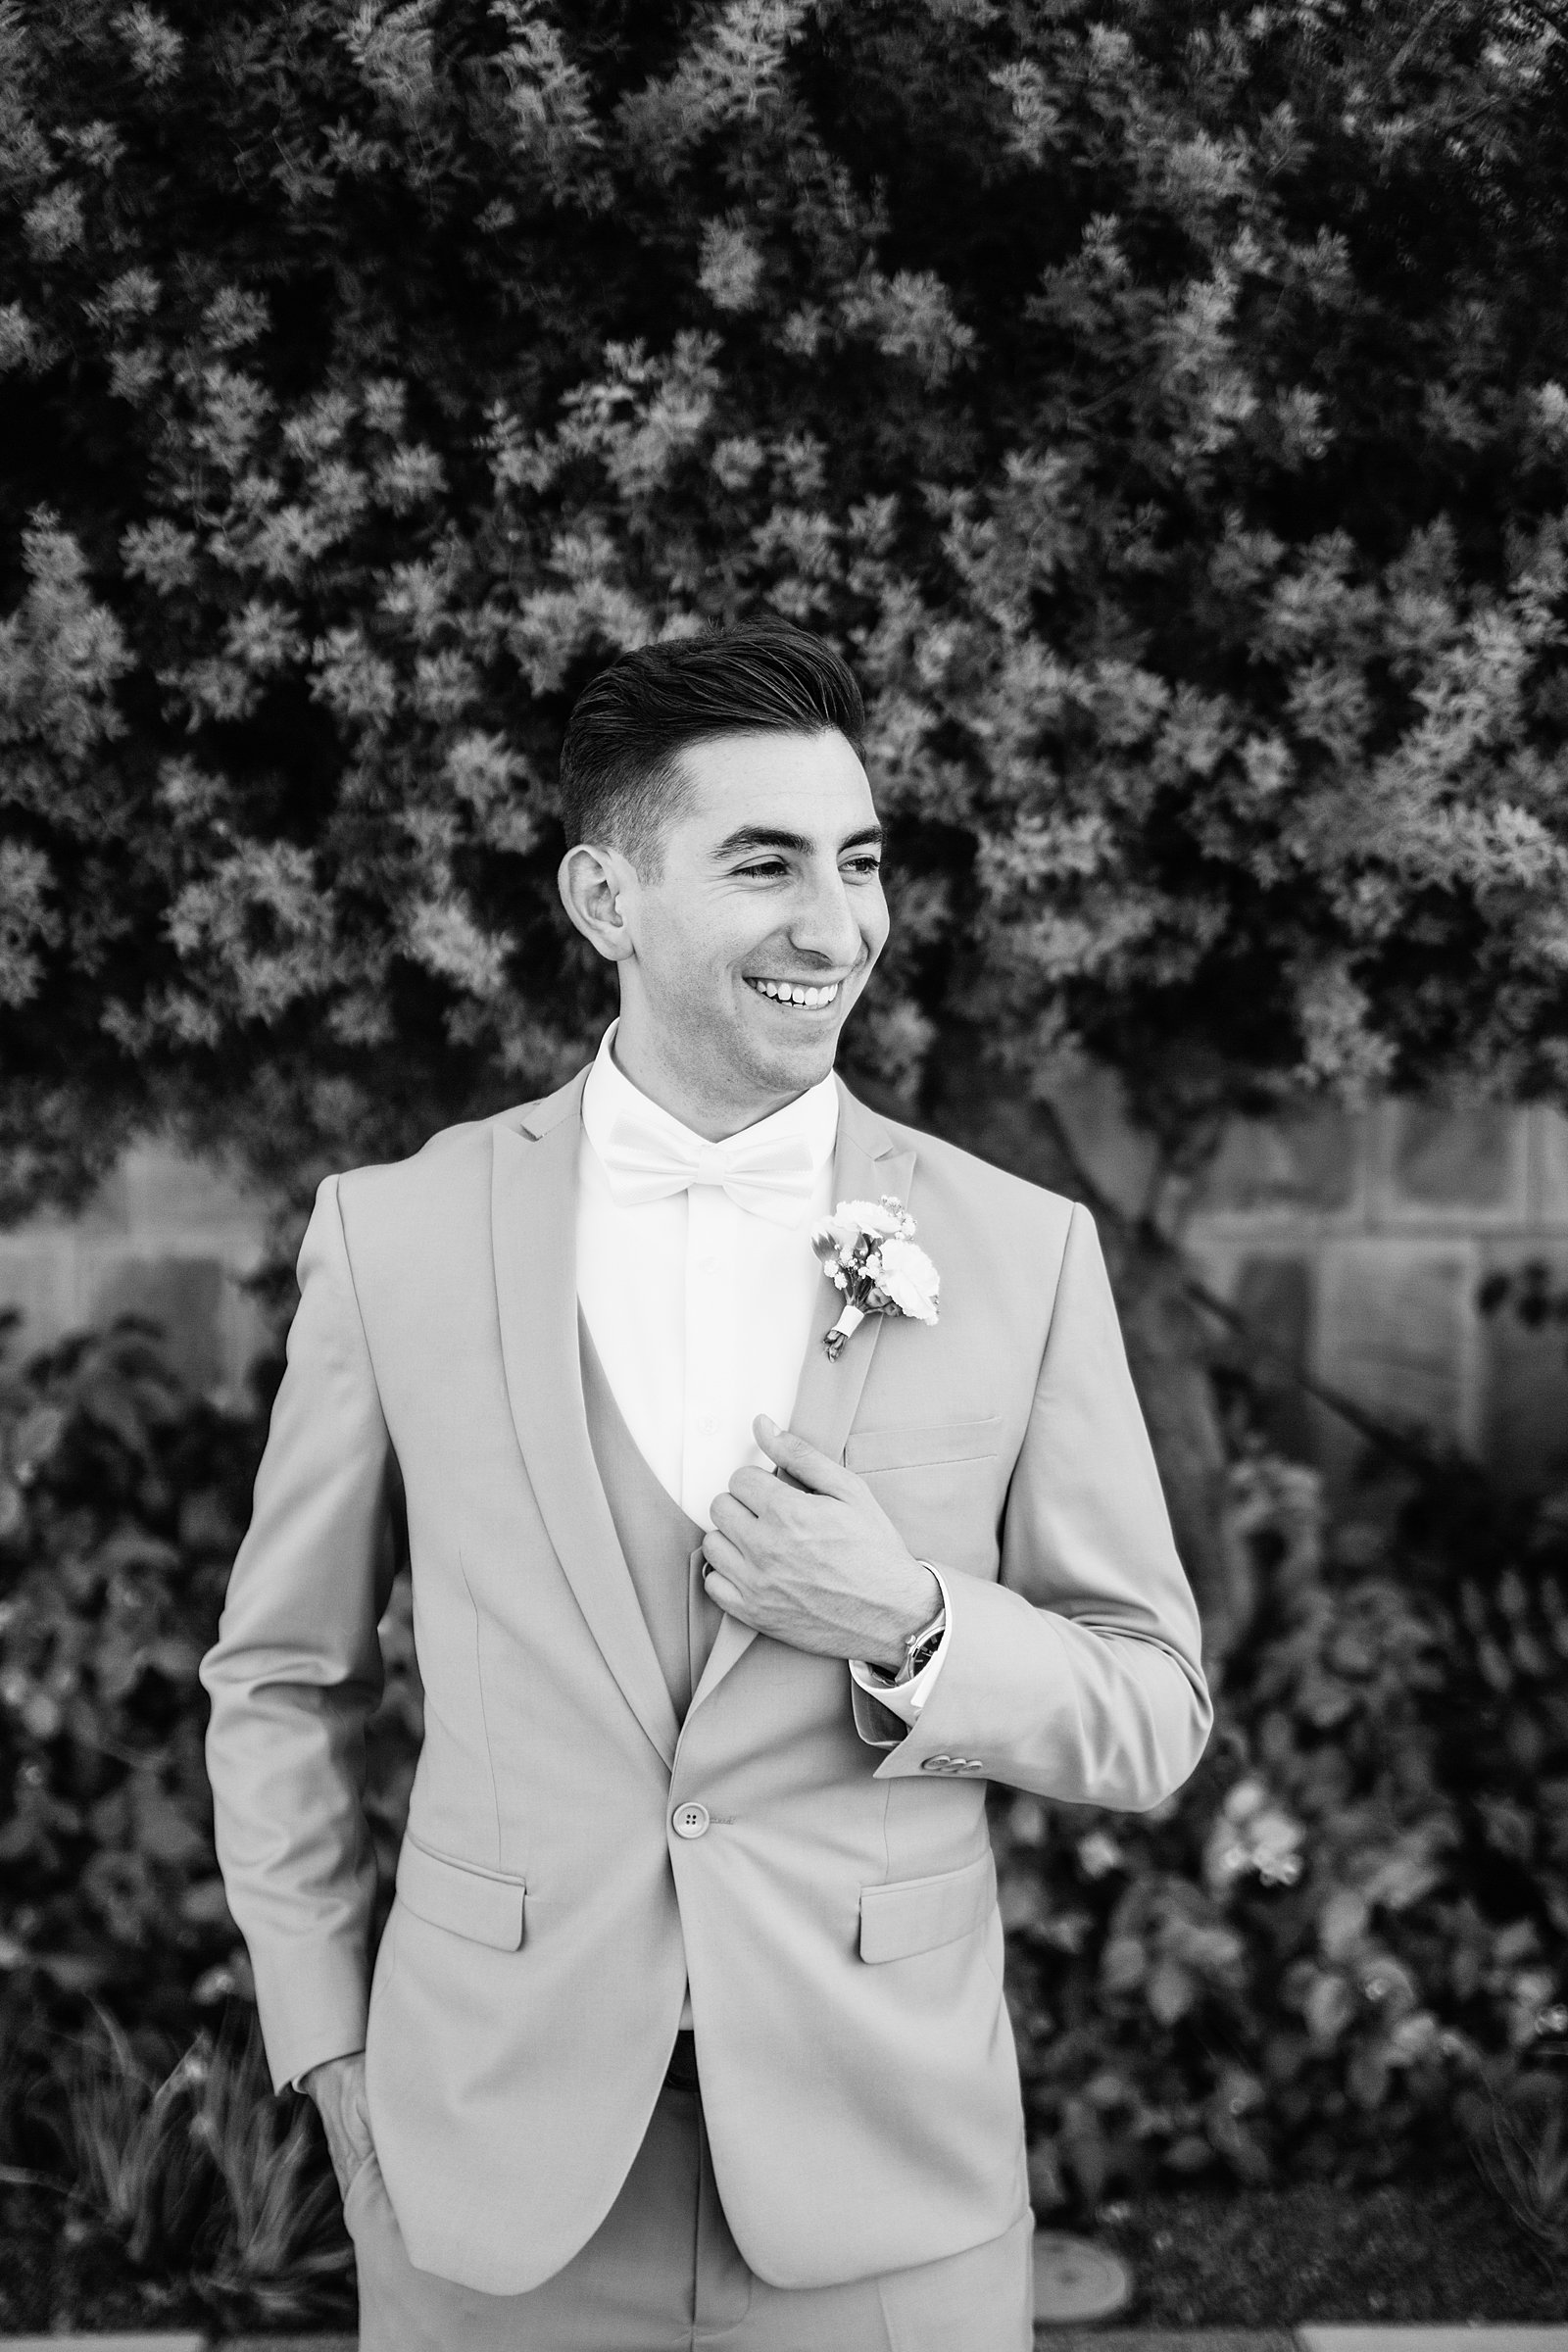 Groom laughing on his wedding day by Phoenix wedding photographer PMA Photography.